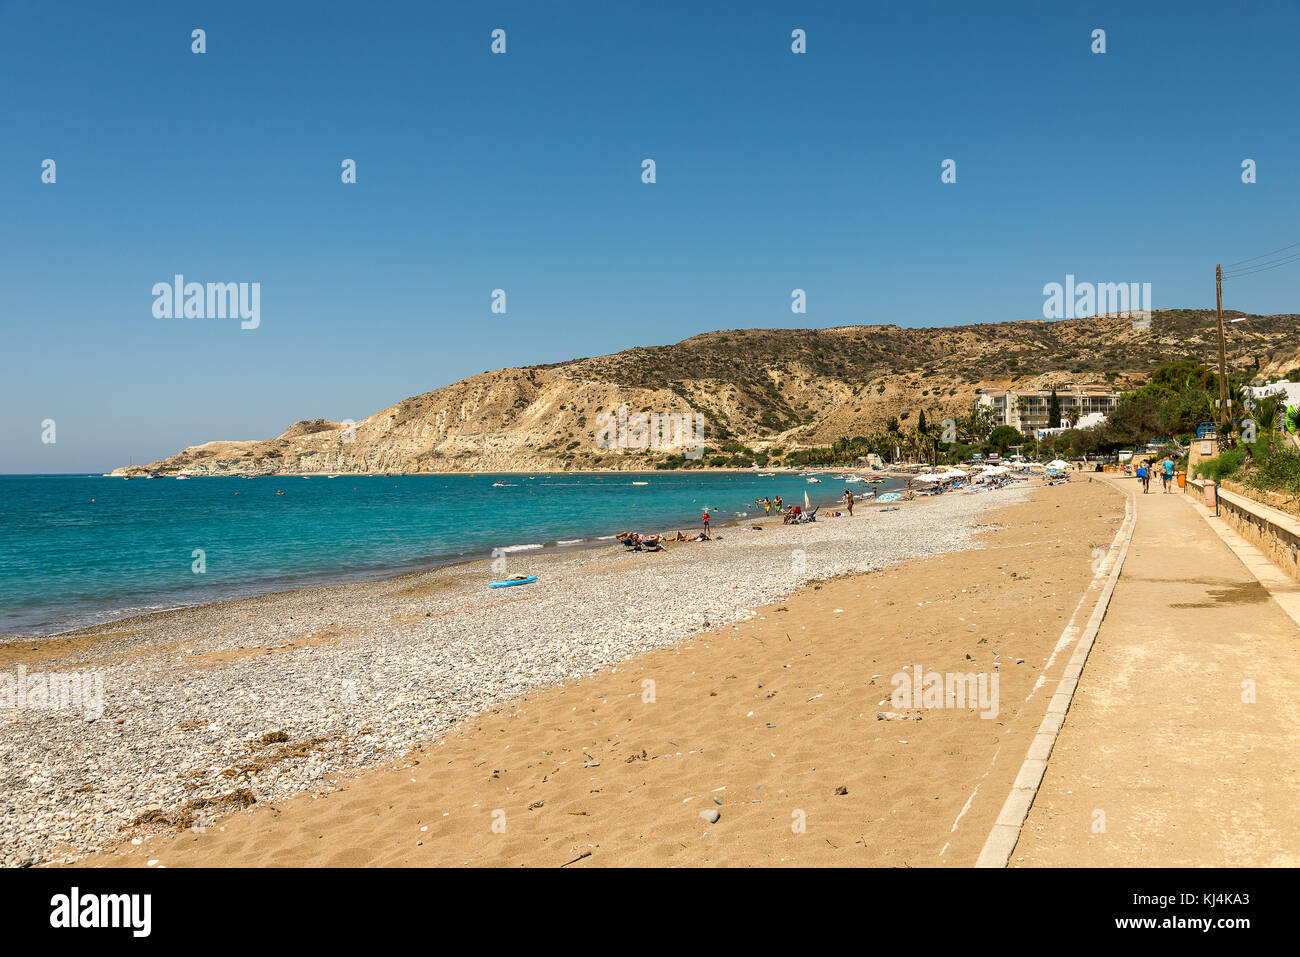 Pissouri Bay beach with tourists relaxing in a warm sunny day, between Limassol and Paphos, Cyprus Stock Photo